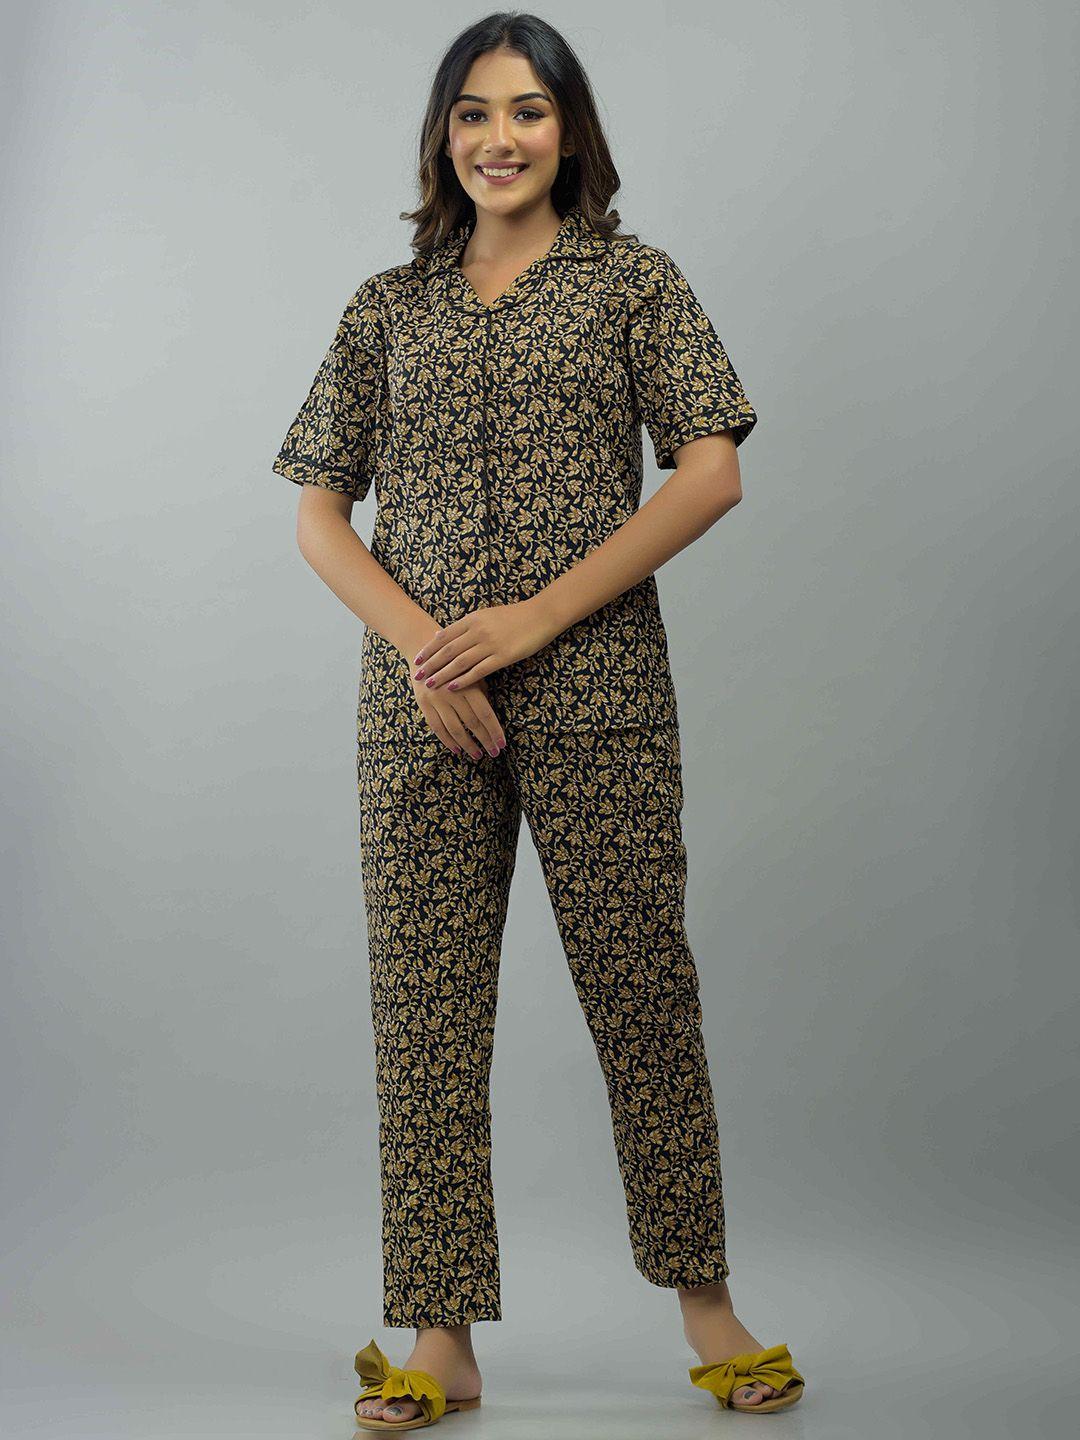 unibliss floral printed pure cotton night suit